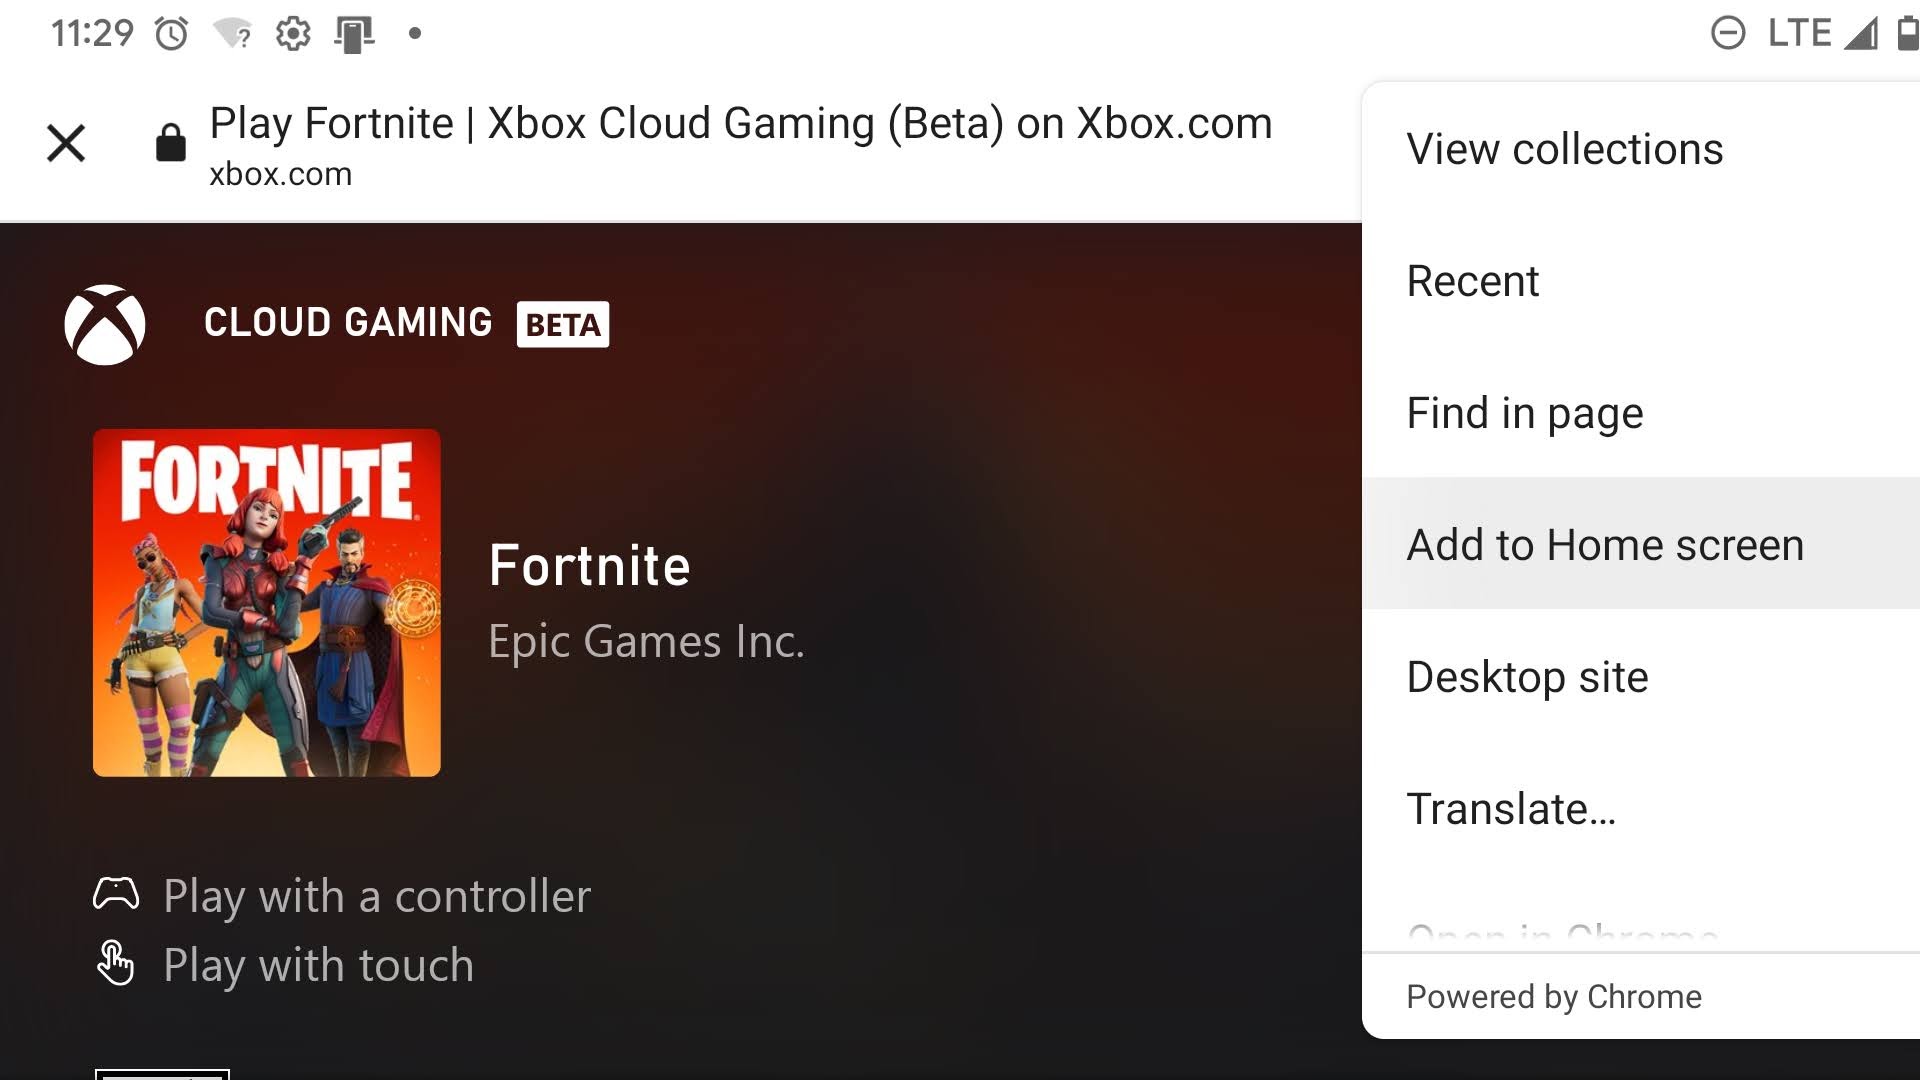 Add Fortnite and Xbox Cloud games to the home screen